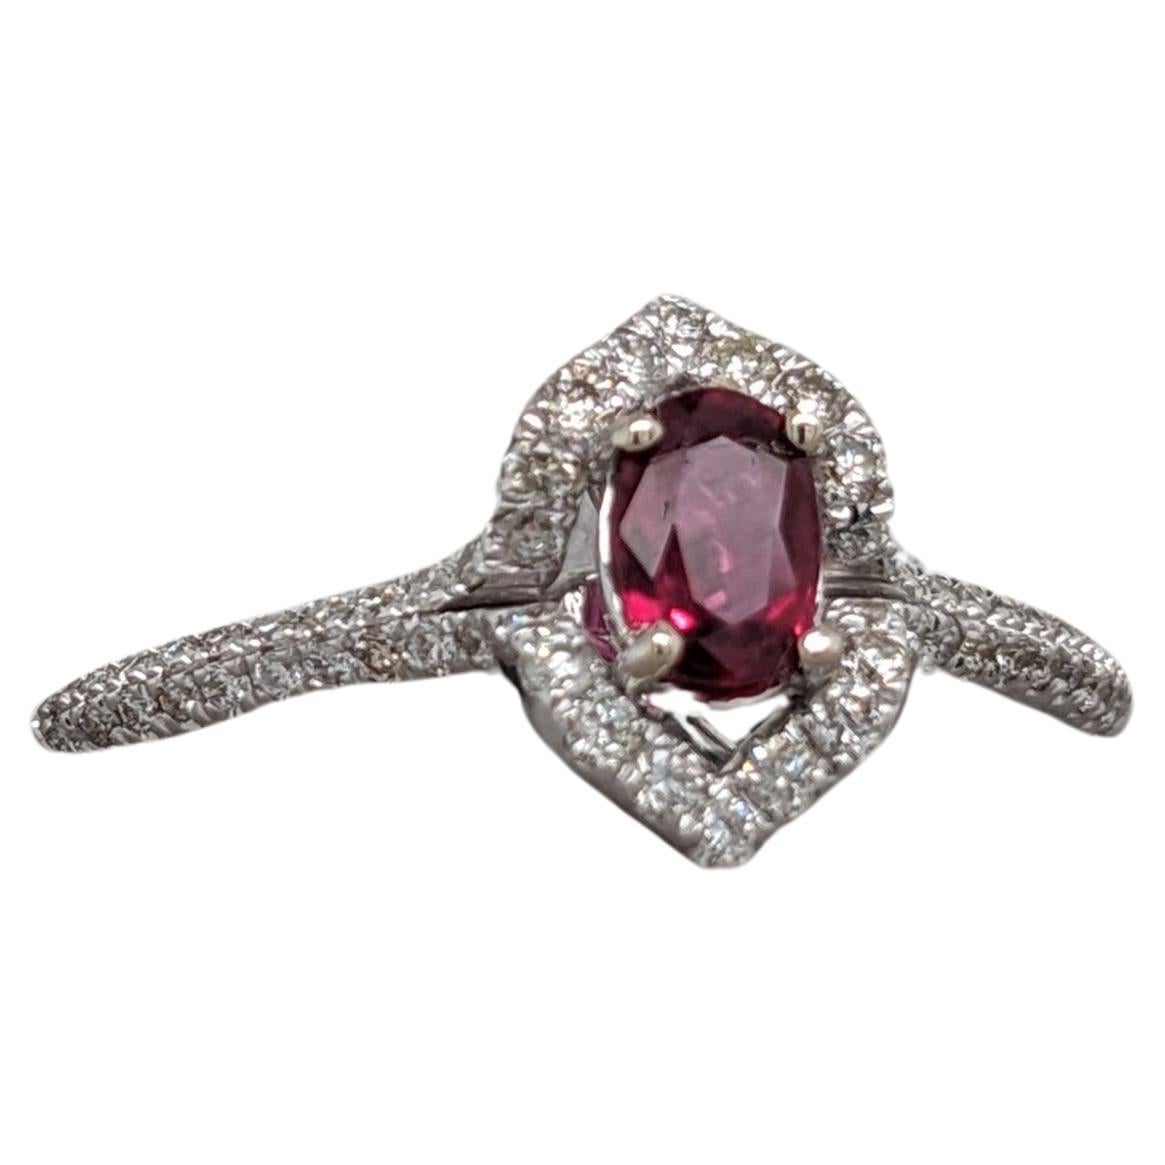 This stunning ring features a beautiful red ruby framed by a diamond halo in a vintage style design. A beautiful collection piece that is perfect for every occasion. 💕

Specifications:

Item Type: Ring
Center Stone: Ruby
Treatment: Heated
Weight: